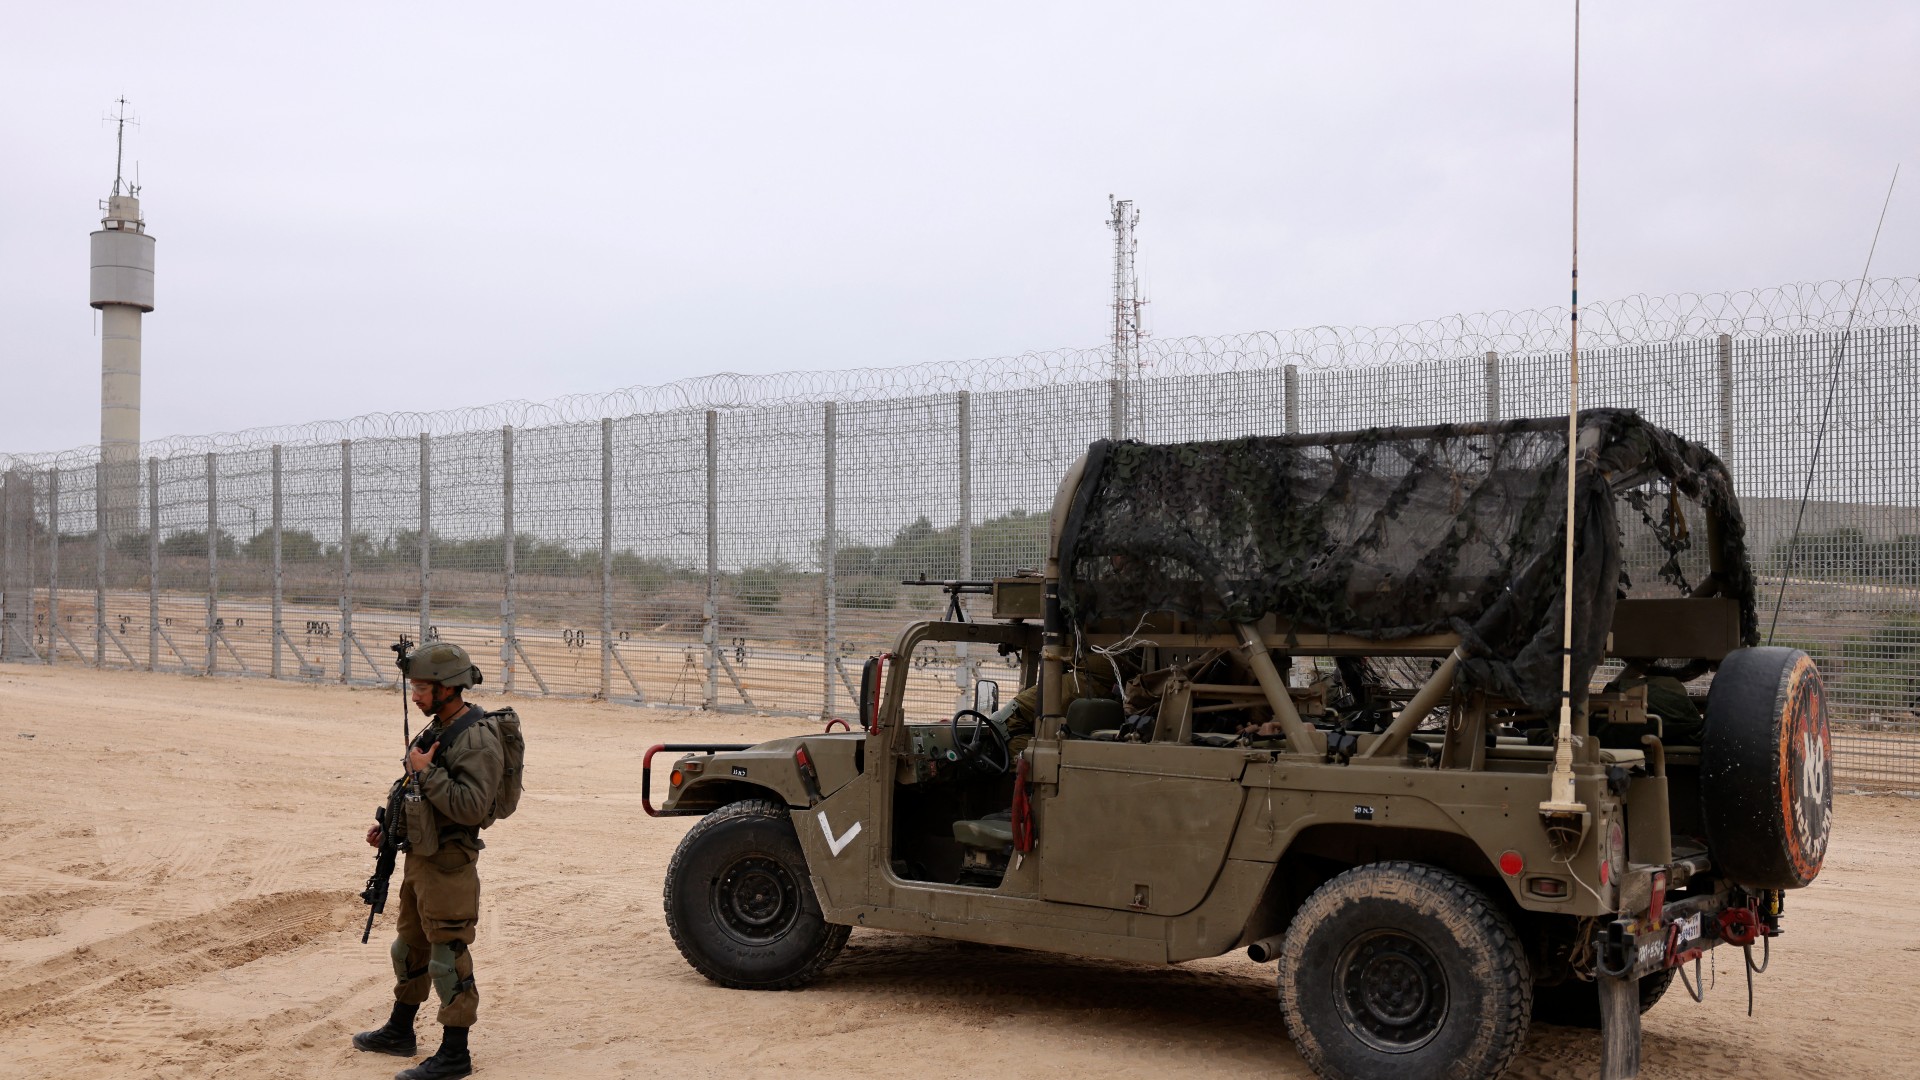 An Israeli soldier stands next to a vehicle parked by the fence along the border with the Gaza Strip near Moshav Netiv HaAsara in southern Israel on December 7, 2021